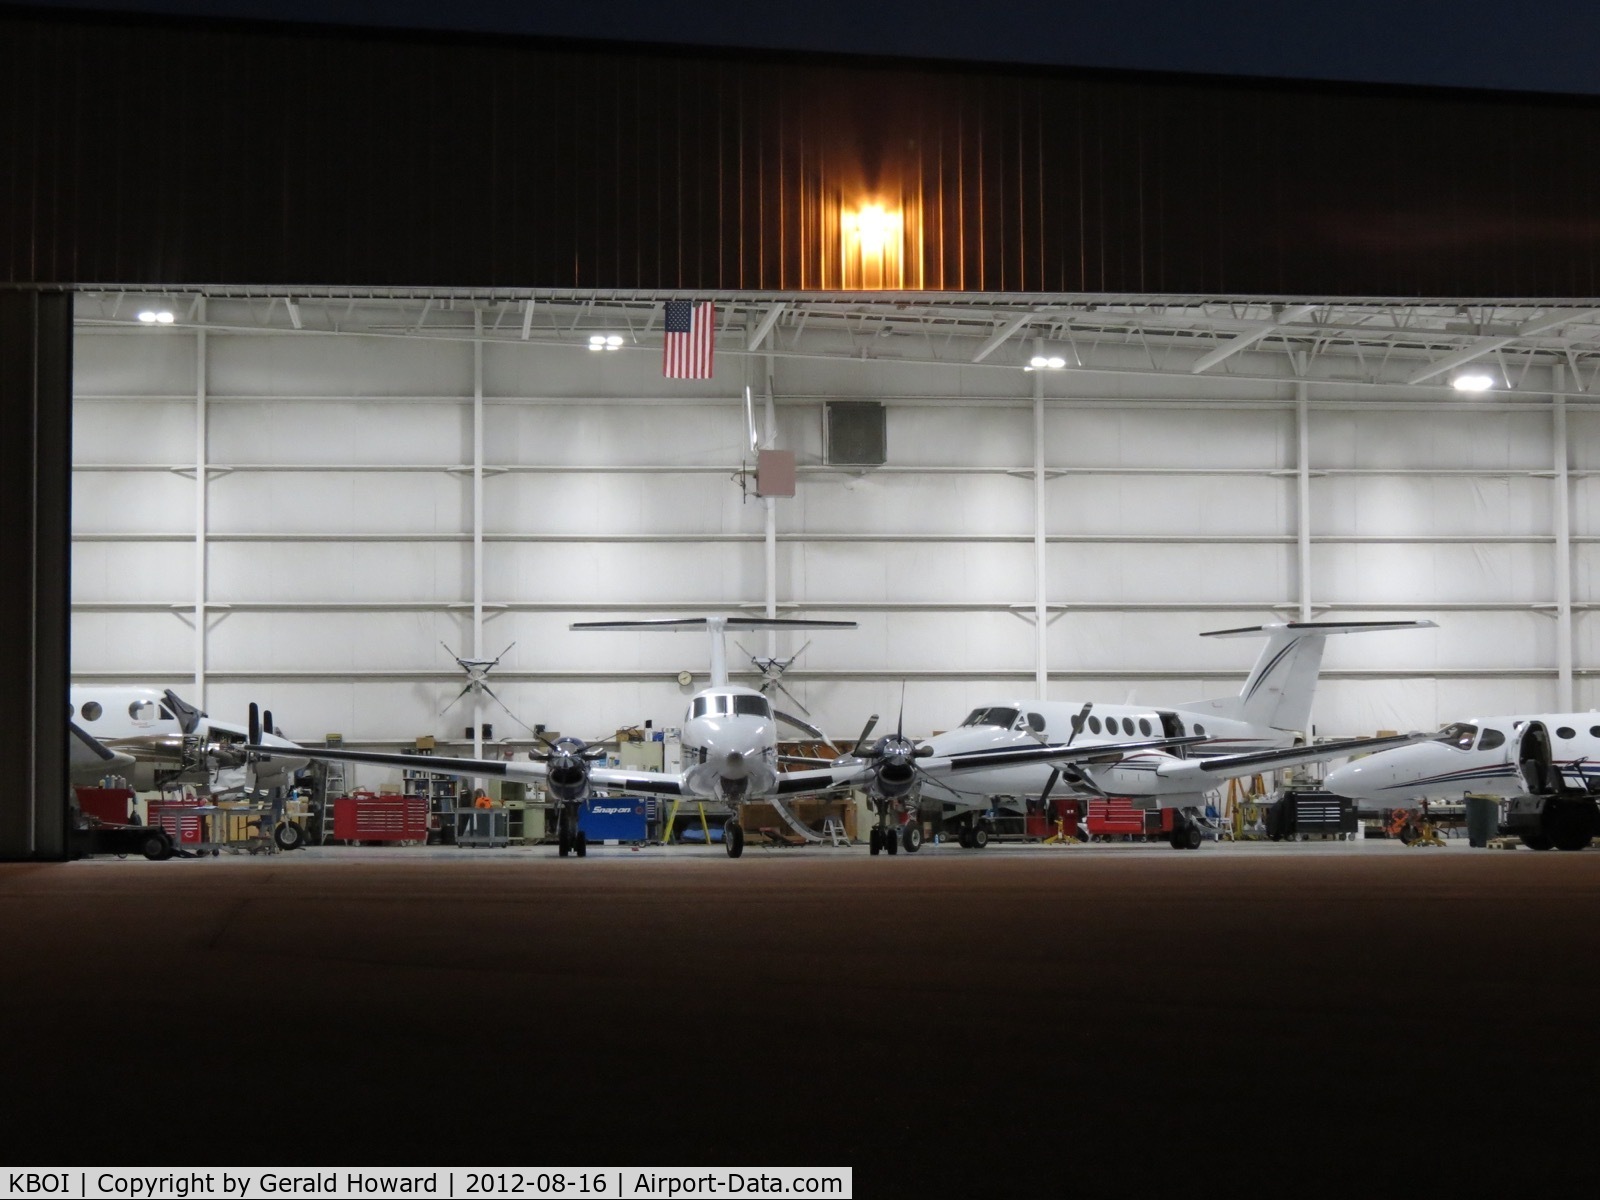 Boise Air Terminal/gowen Fld Airport (BOI) - Early morning work at one of the maintenance hangers. 